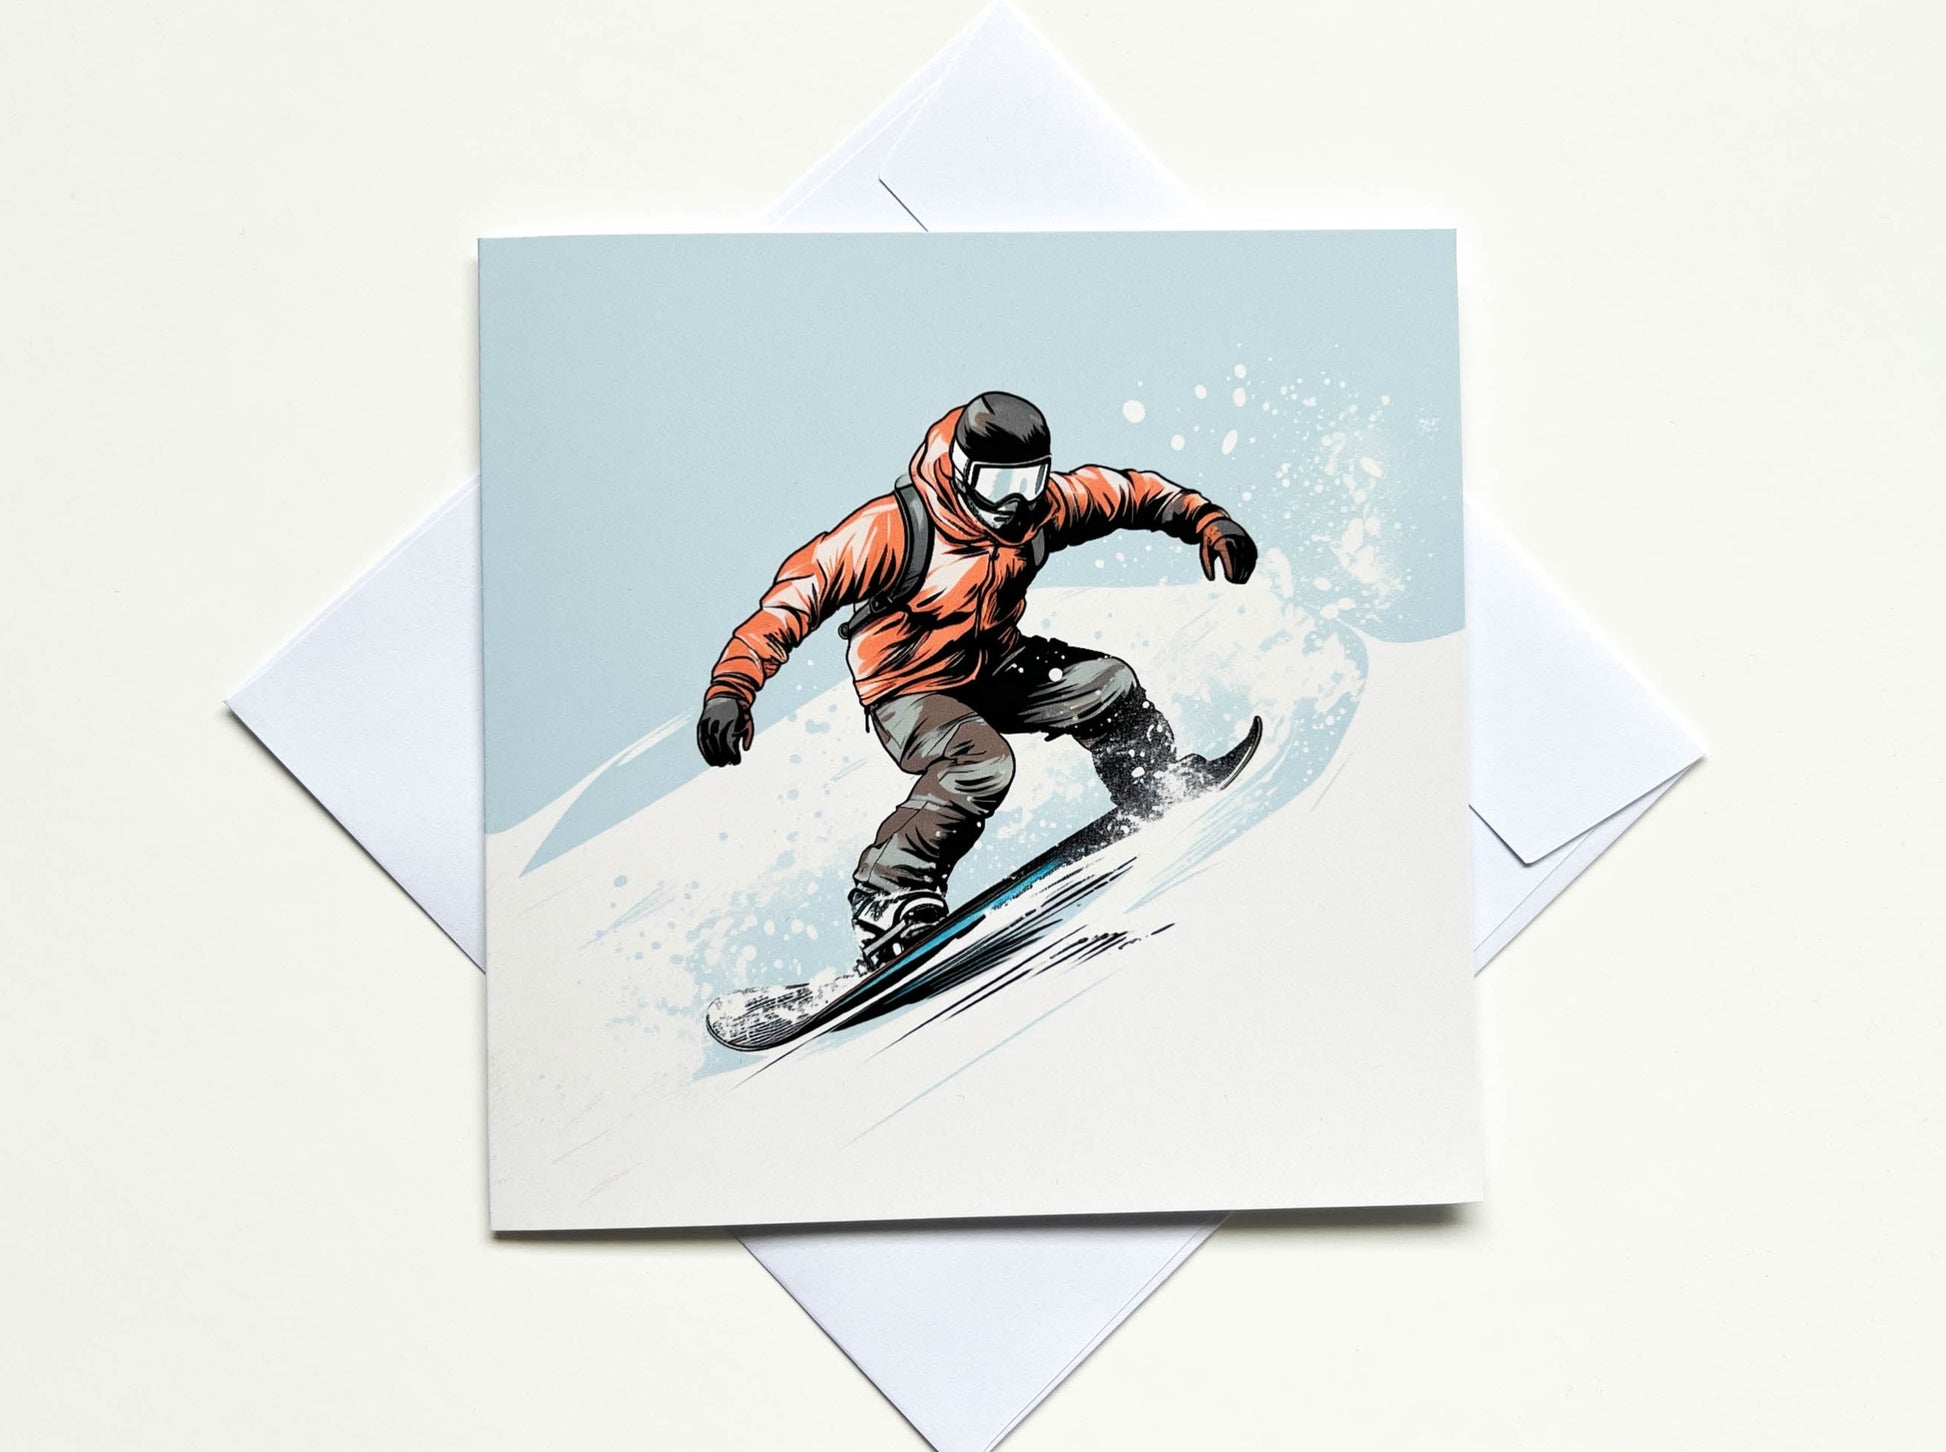 Greetings card showing a minimalist illustration of a man wearing a red jacket and black trousers snowboarding down a mountain with snow spray coming from his snowboard.  